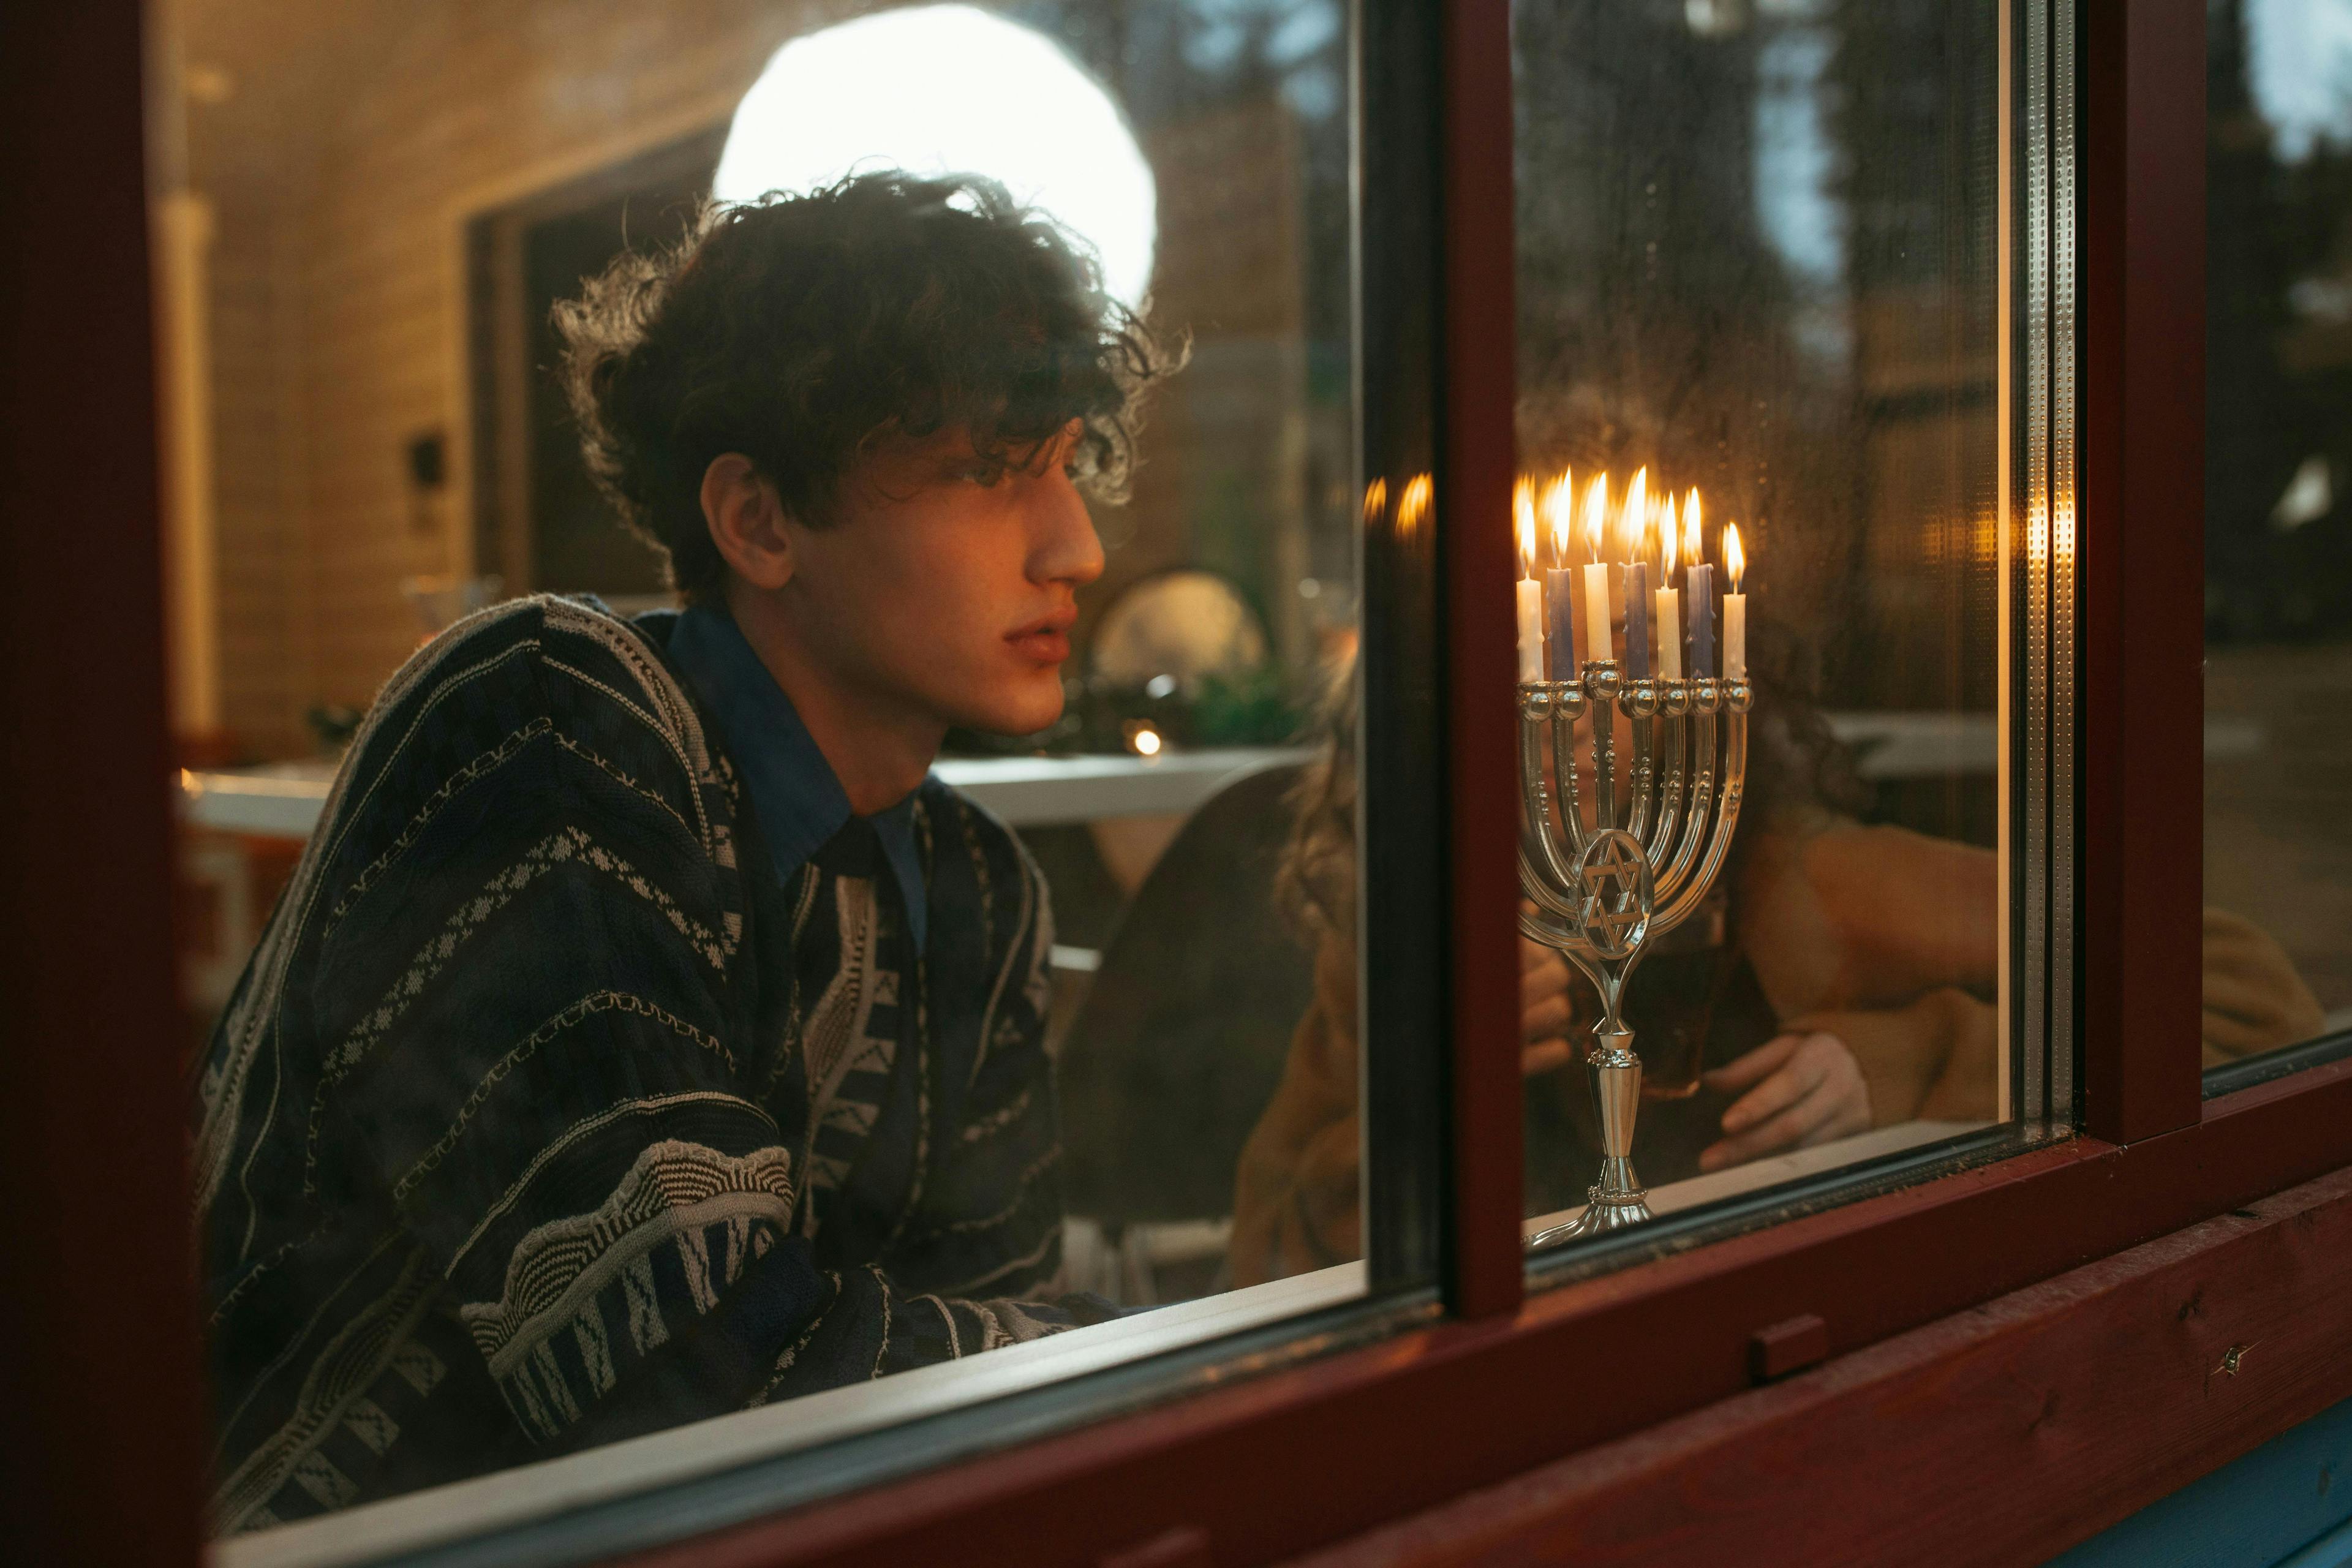 Jewish guy looking out window